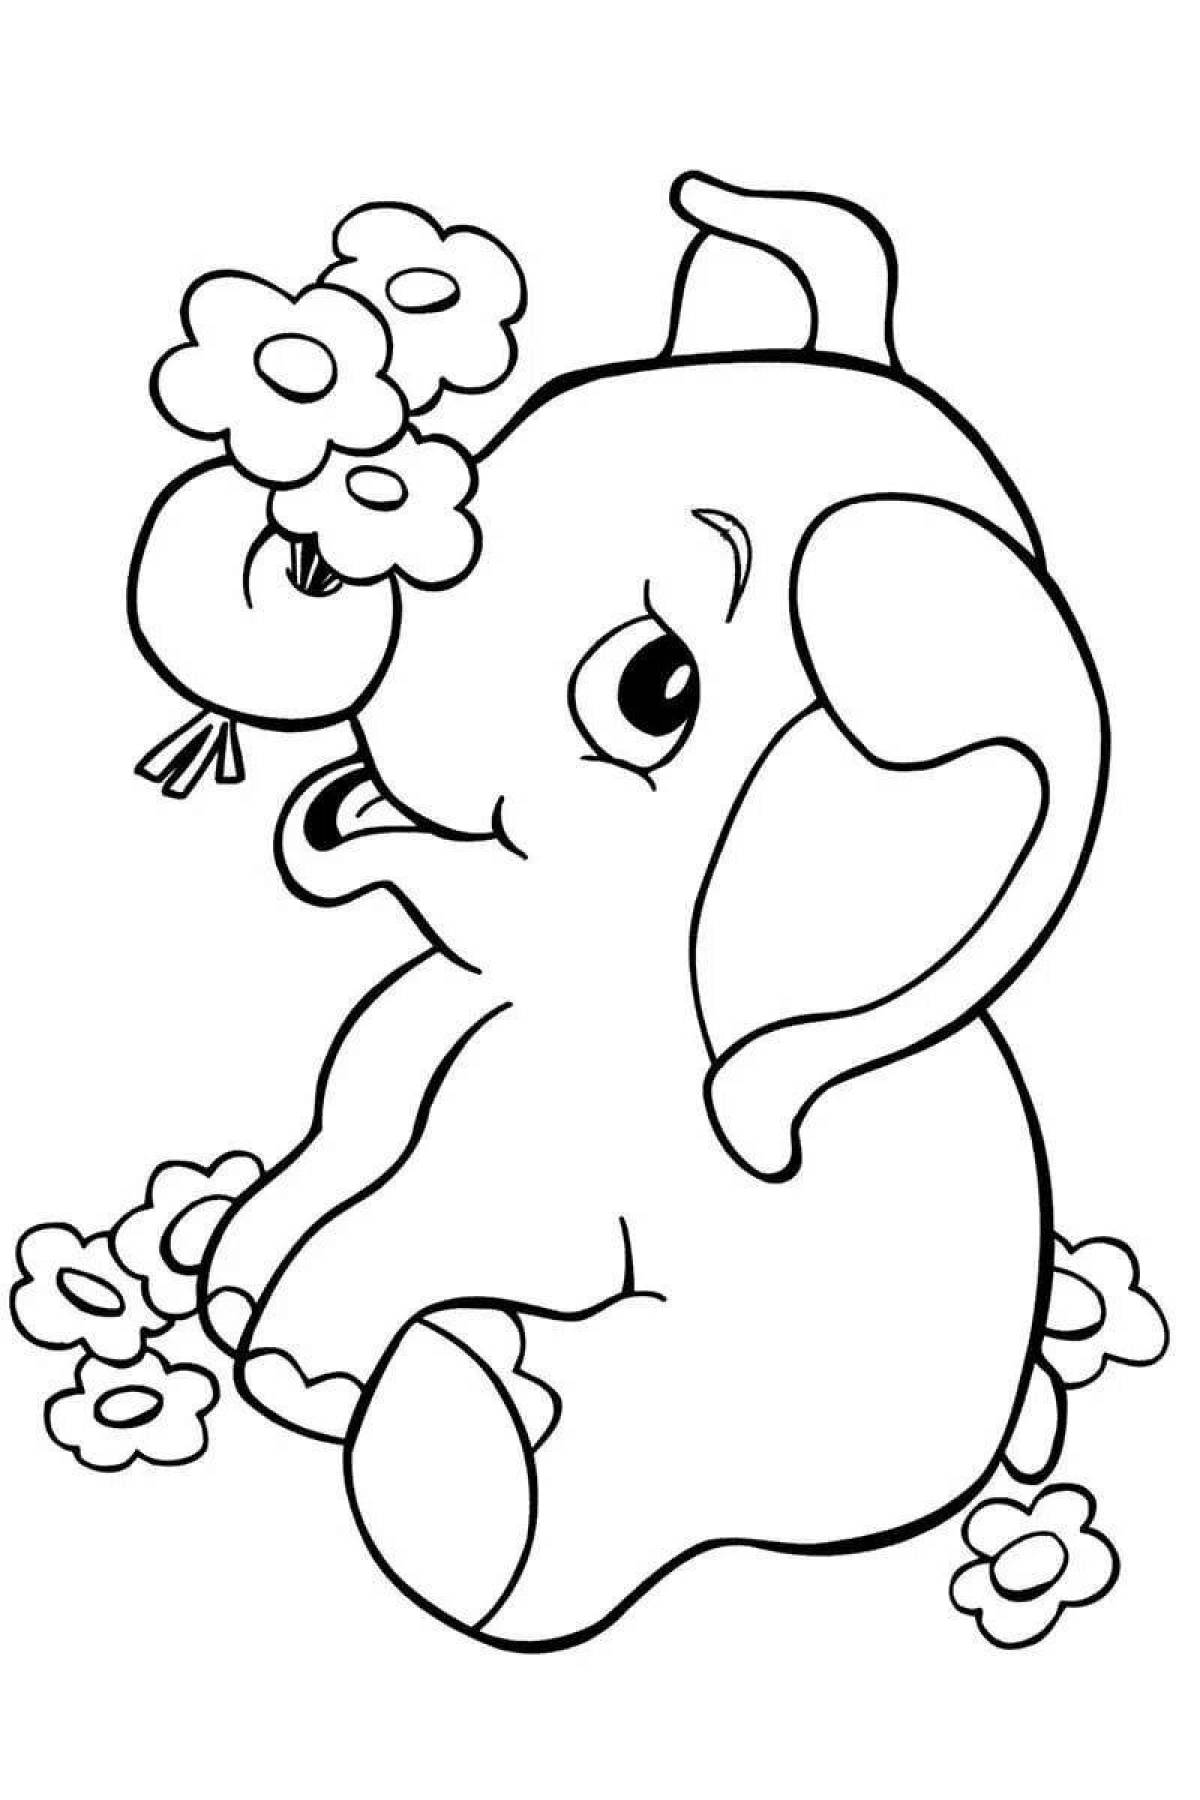 Coloring funny animal drawing